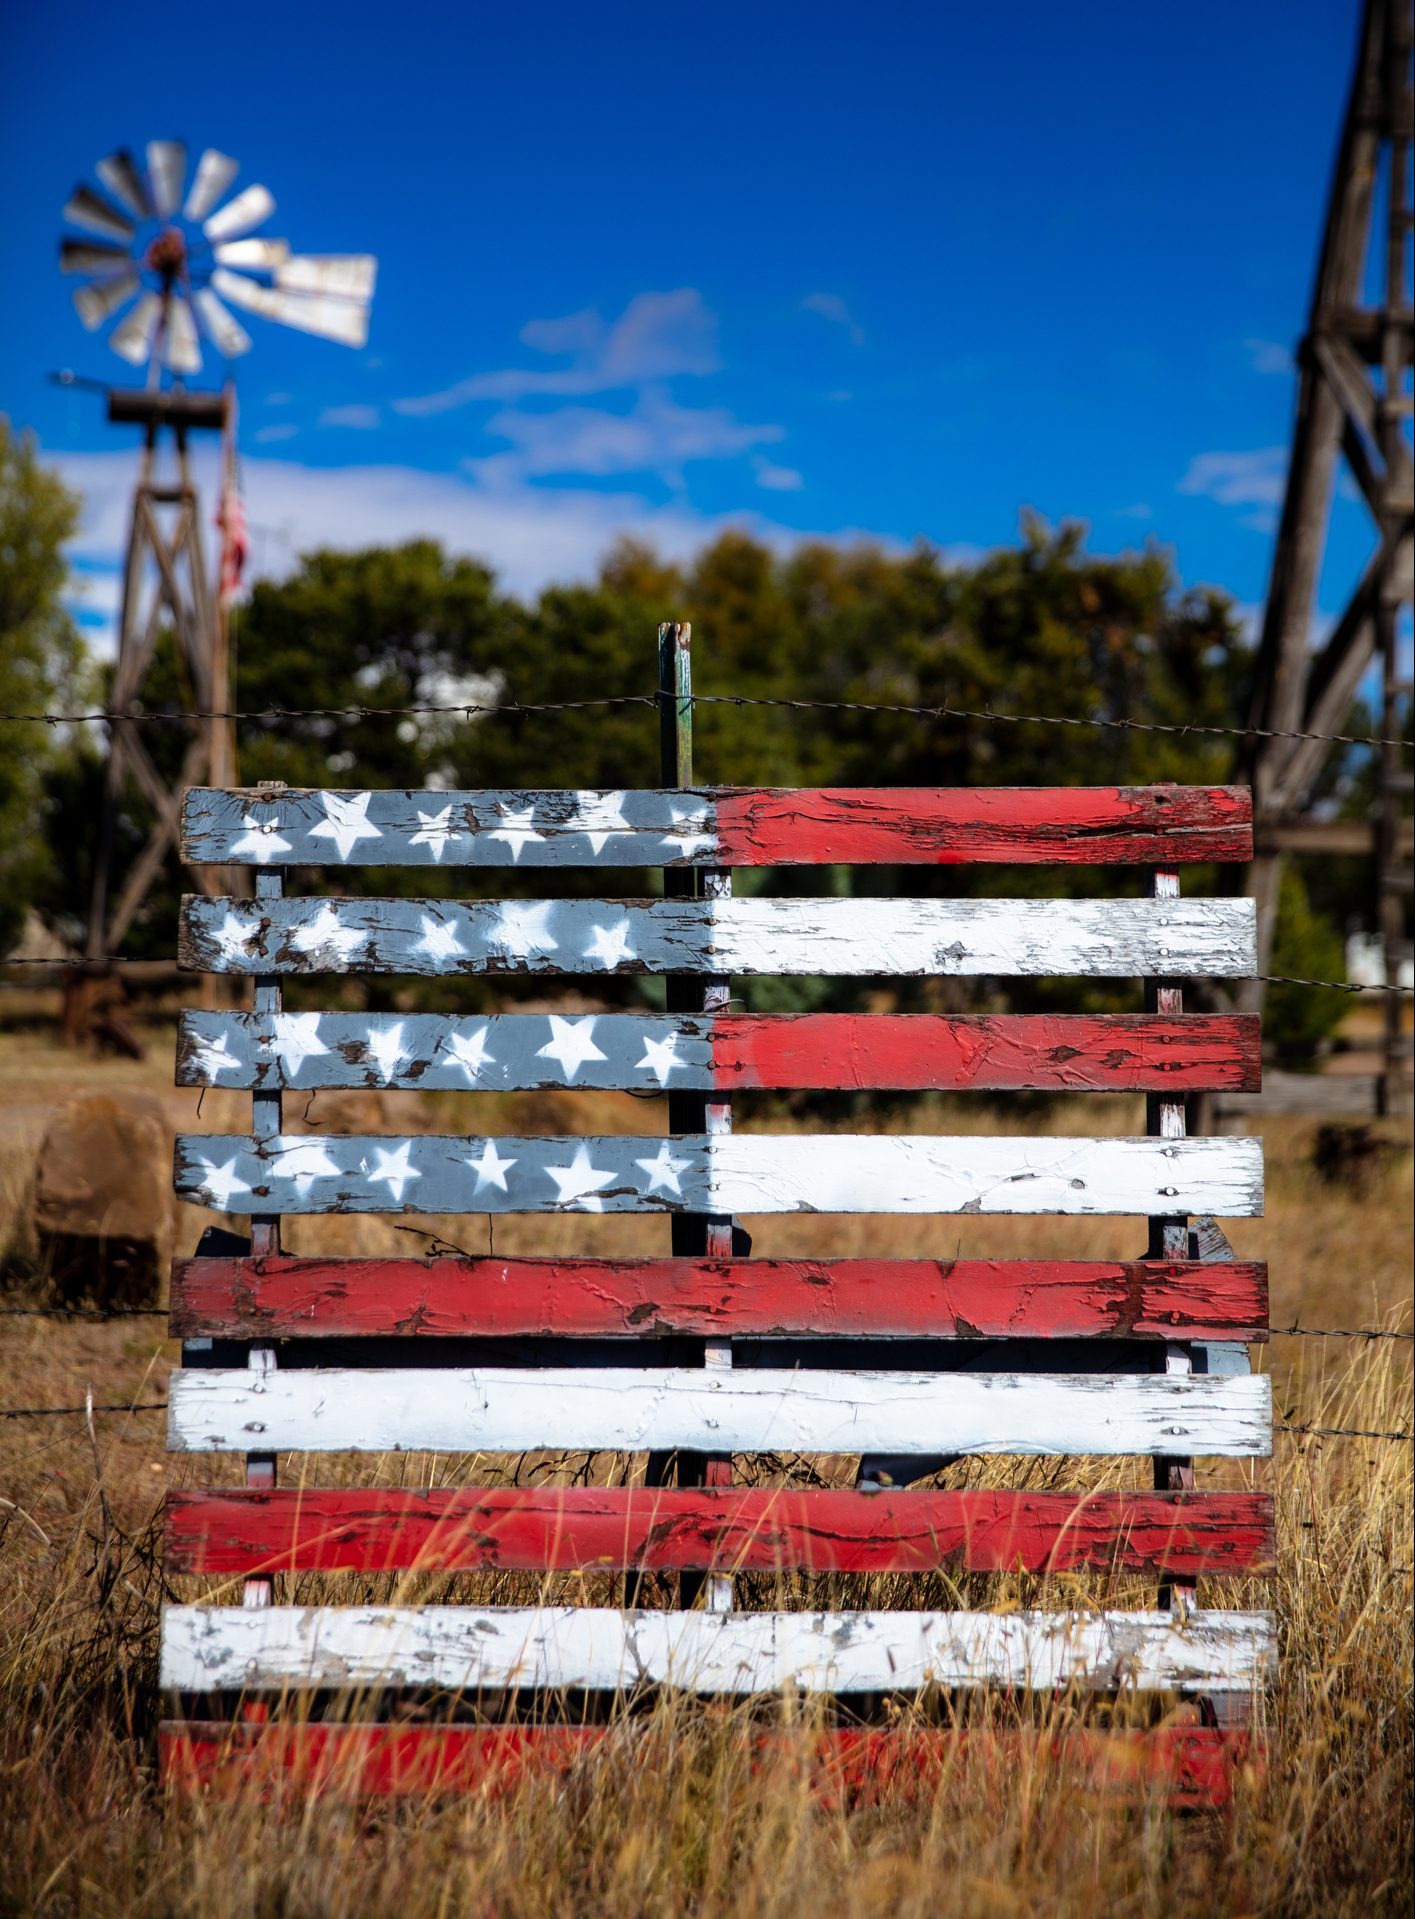 An old fashioned windpump against a bright blue sky behind a wooden pallet painted with the stars and stripes of the american flag